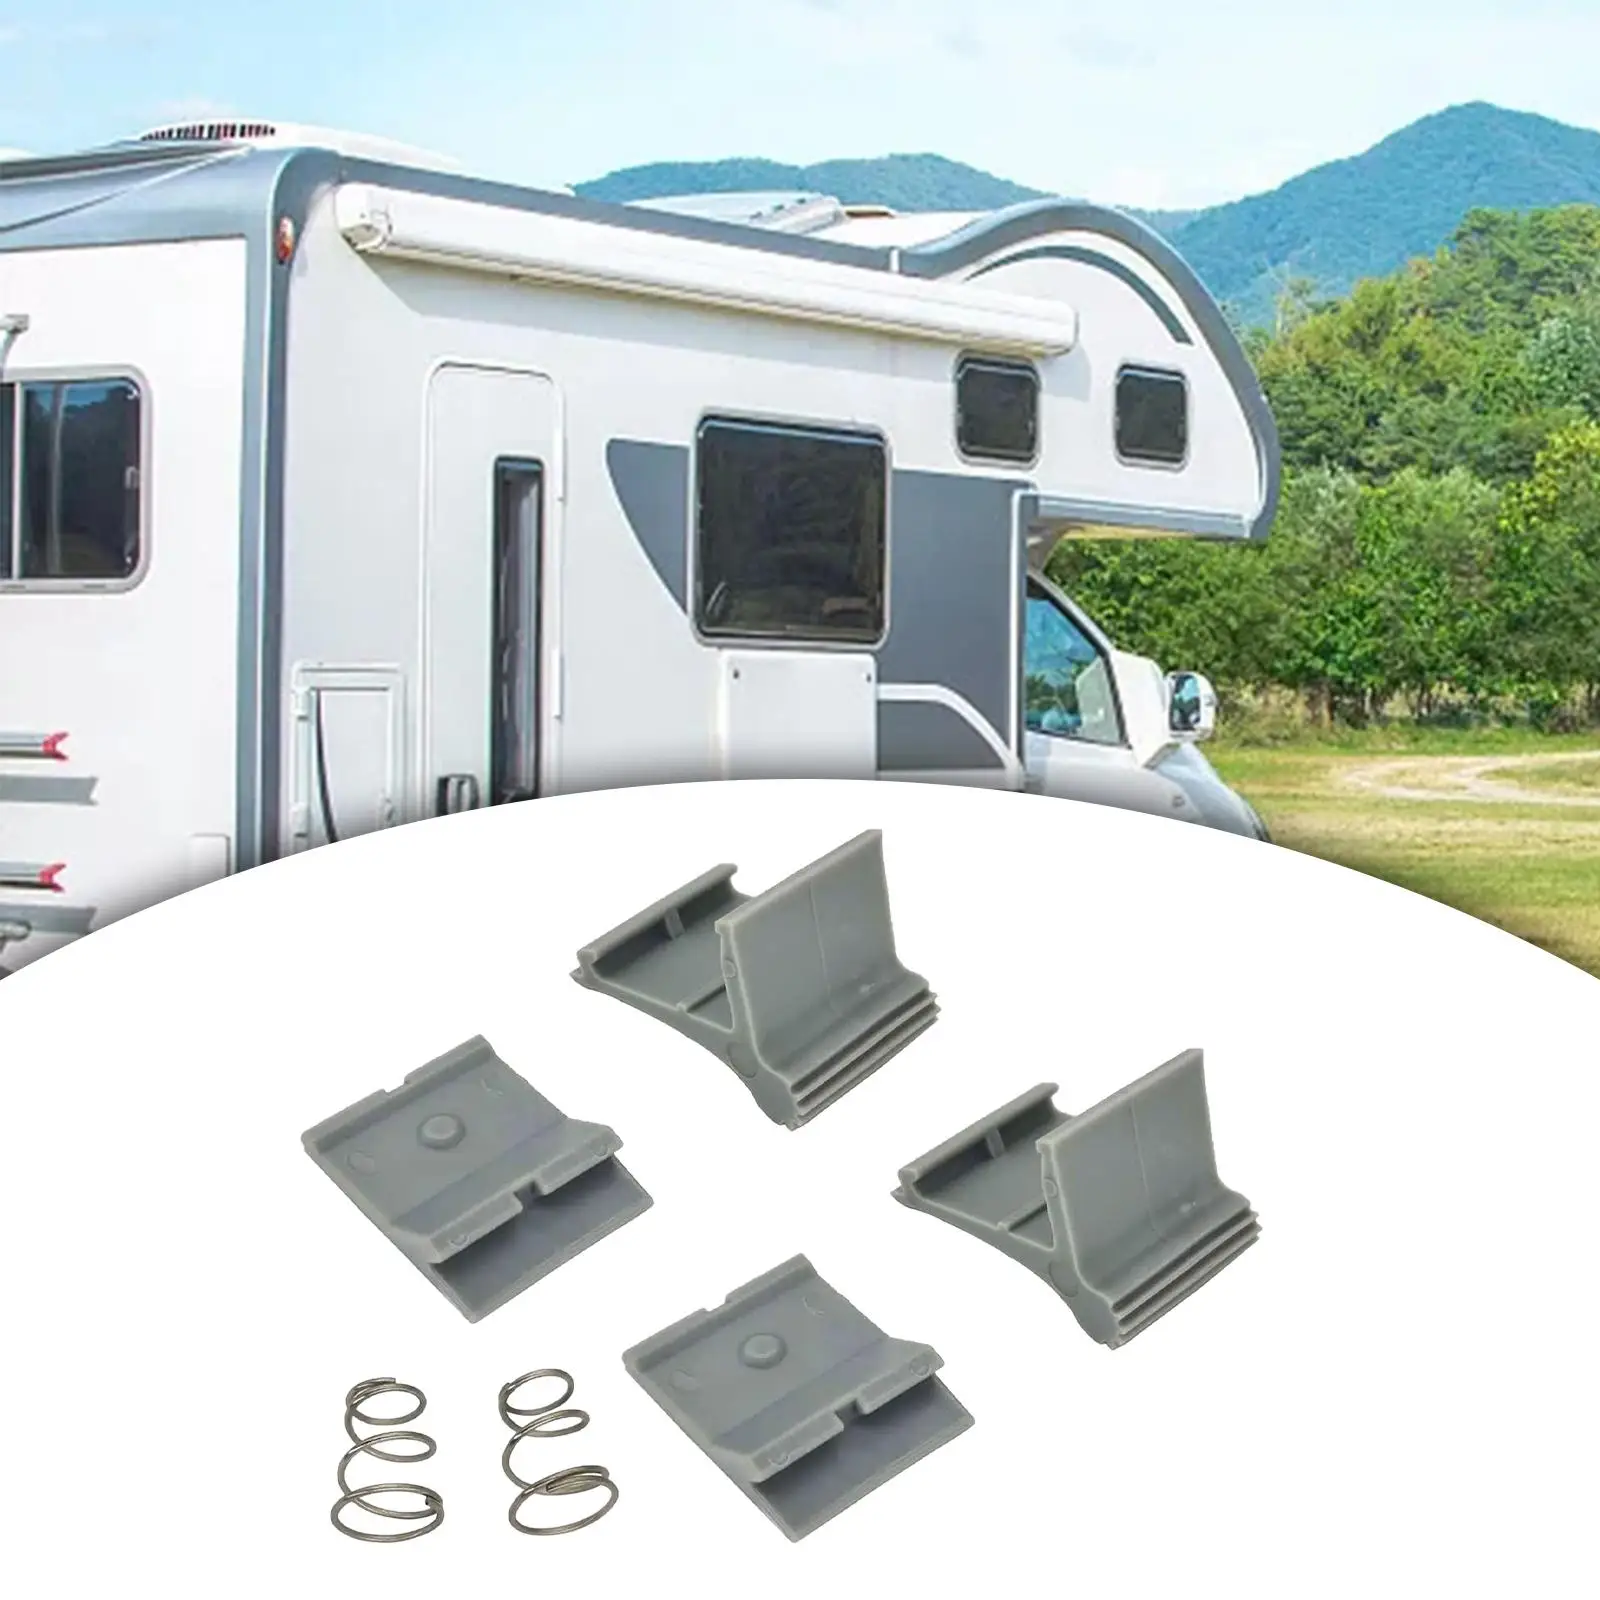 RV Awning Arm Slider Catch Set Spare Parts 4 Slider Catch Accessories Easy to Install for RV Trailer Motorhome